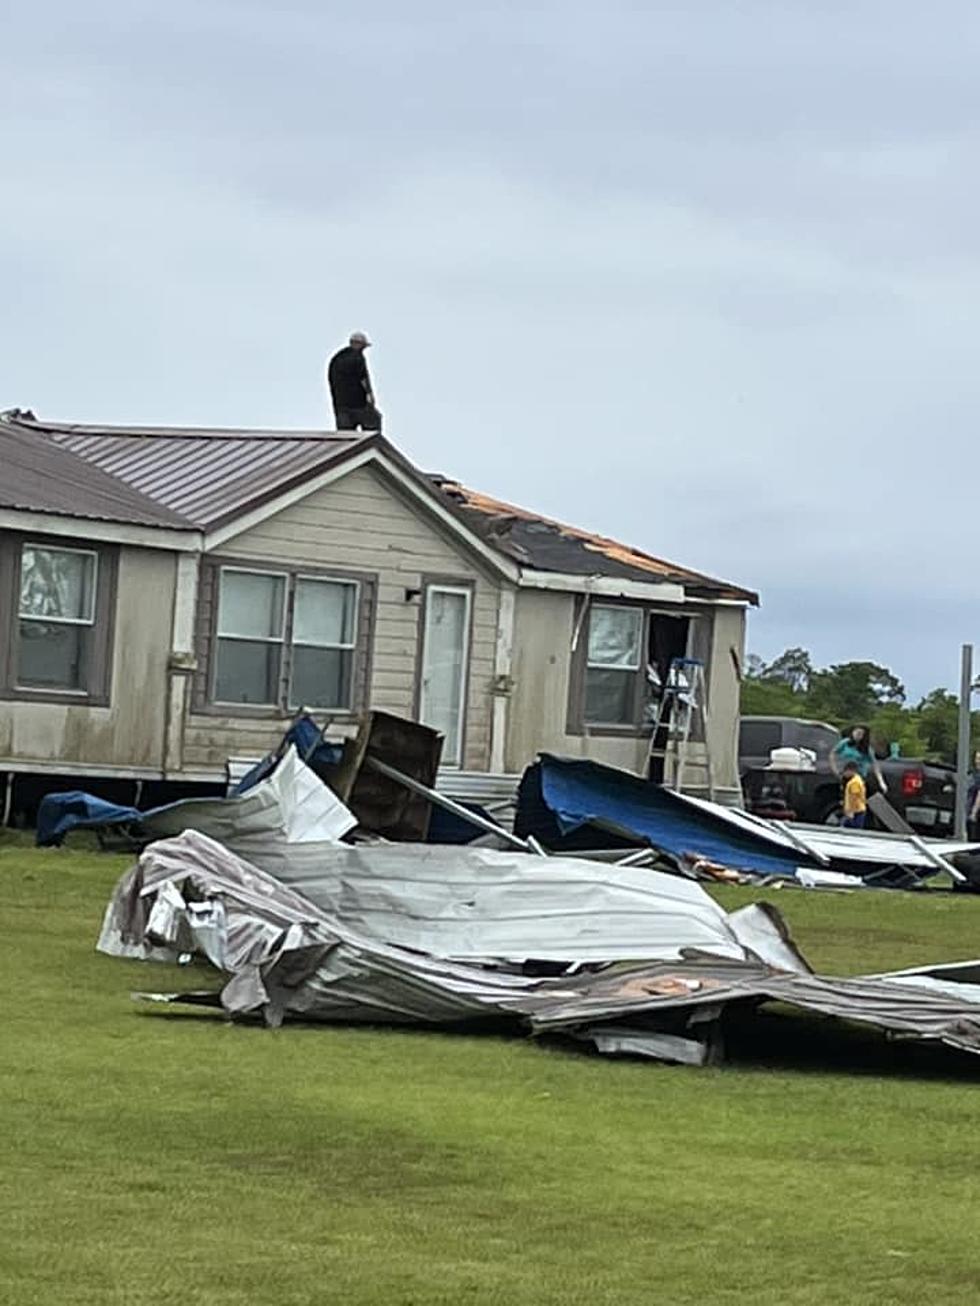 National Weather Service Confirms Tornado Touched Down in Morse